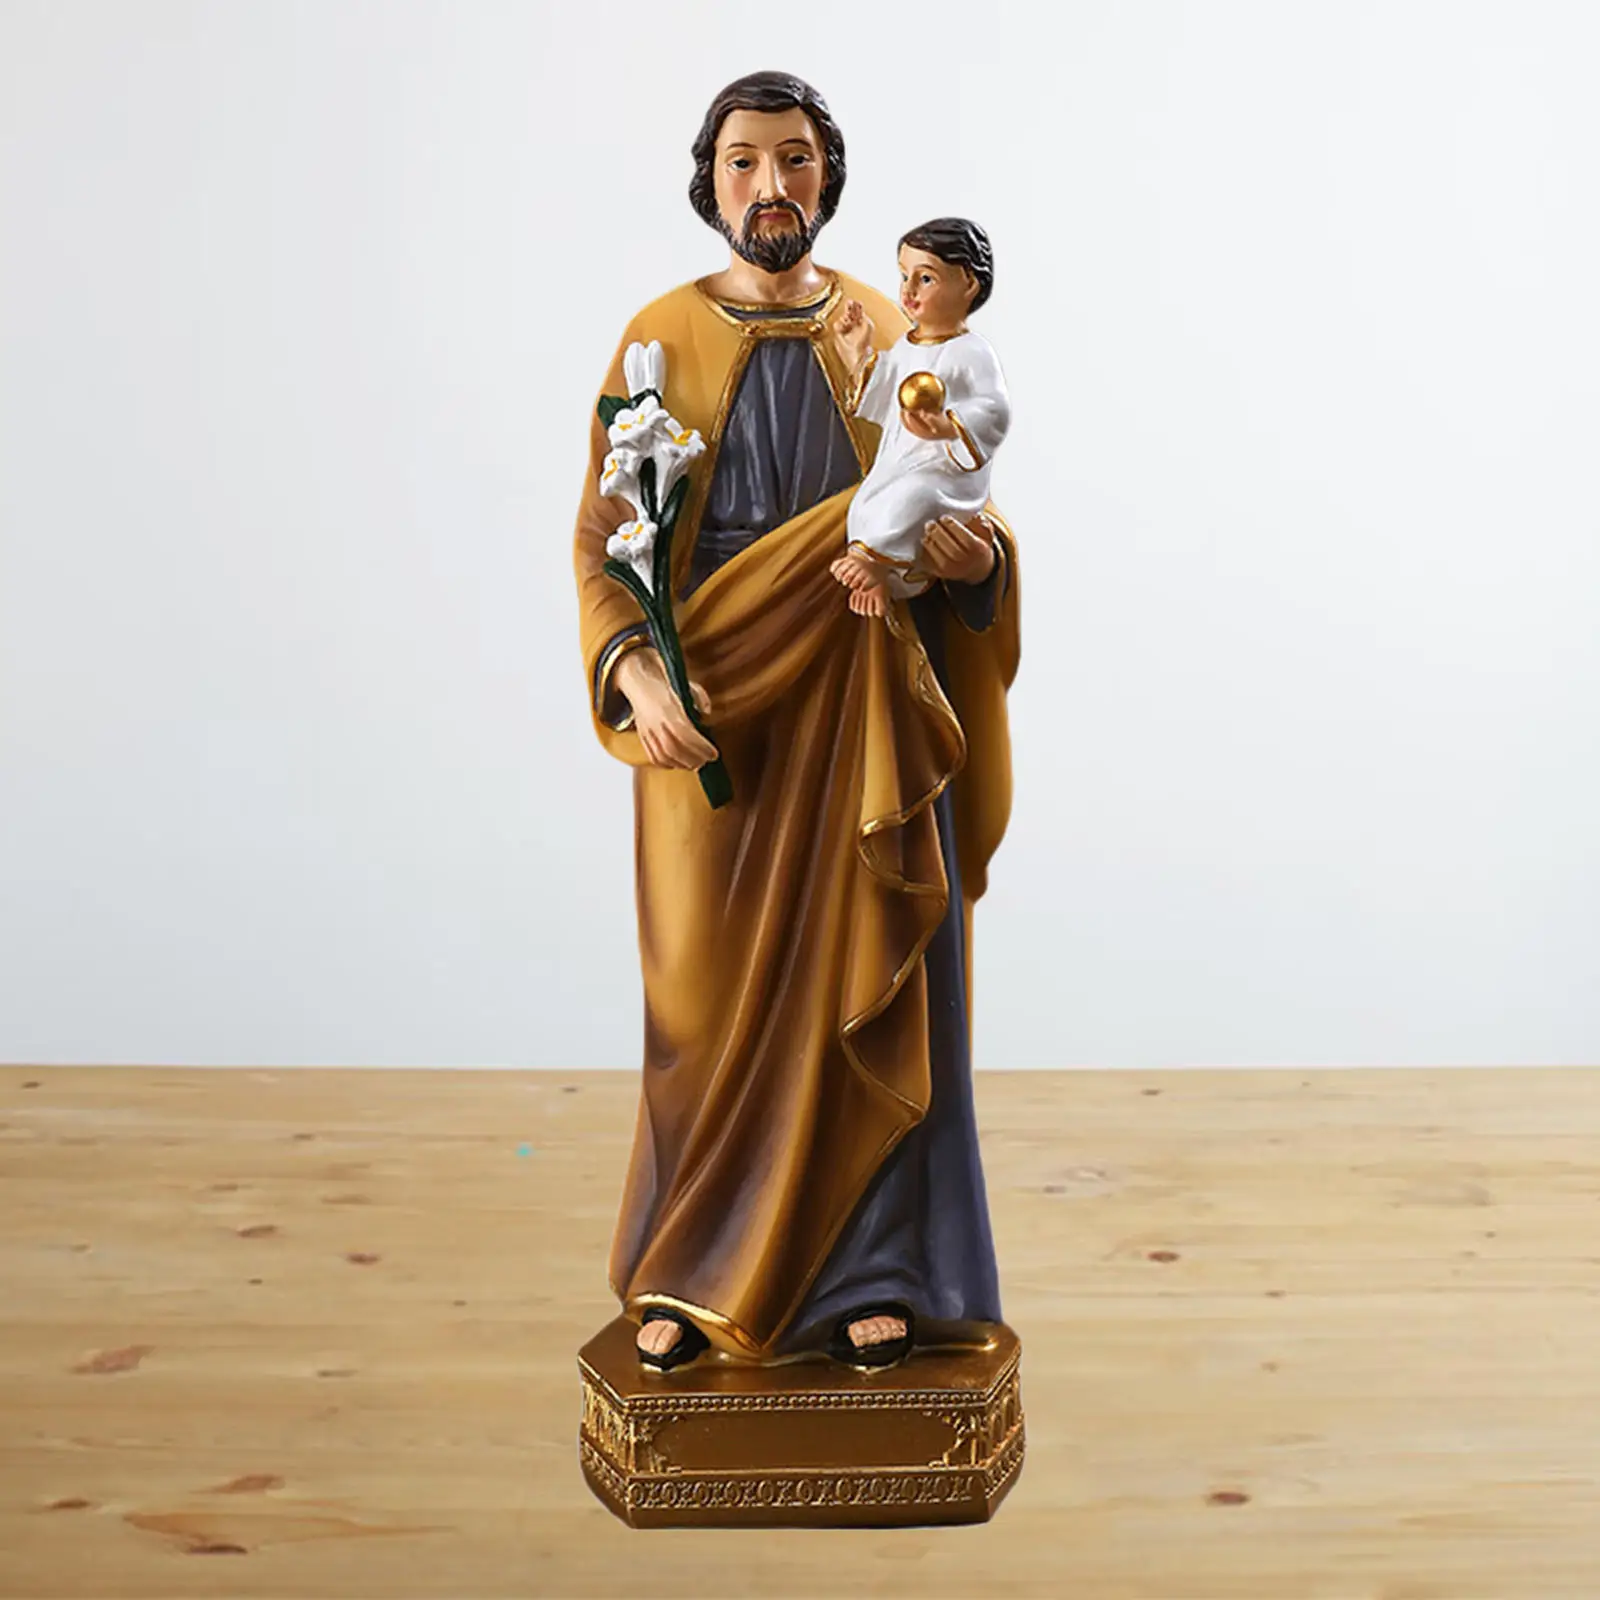 Saint Joseph and Child Jesus on Base 20cm Resin Colored Statue Patron of Fathers & Employment